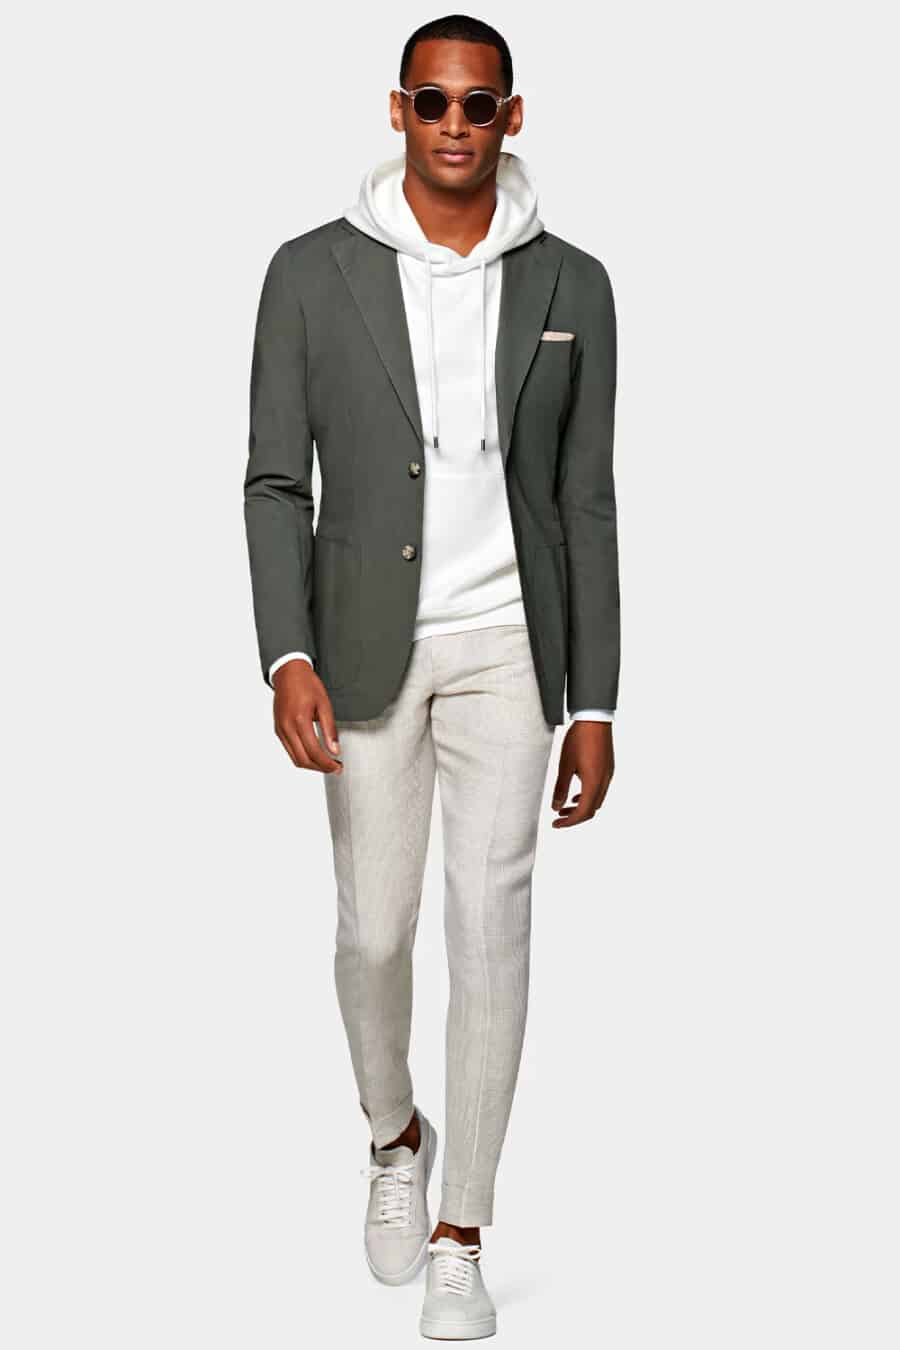 Men's grey tailored pants, white hoodie, olive green blazer, white sneakers and round sunglasses outfit